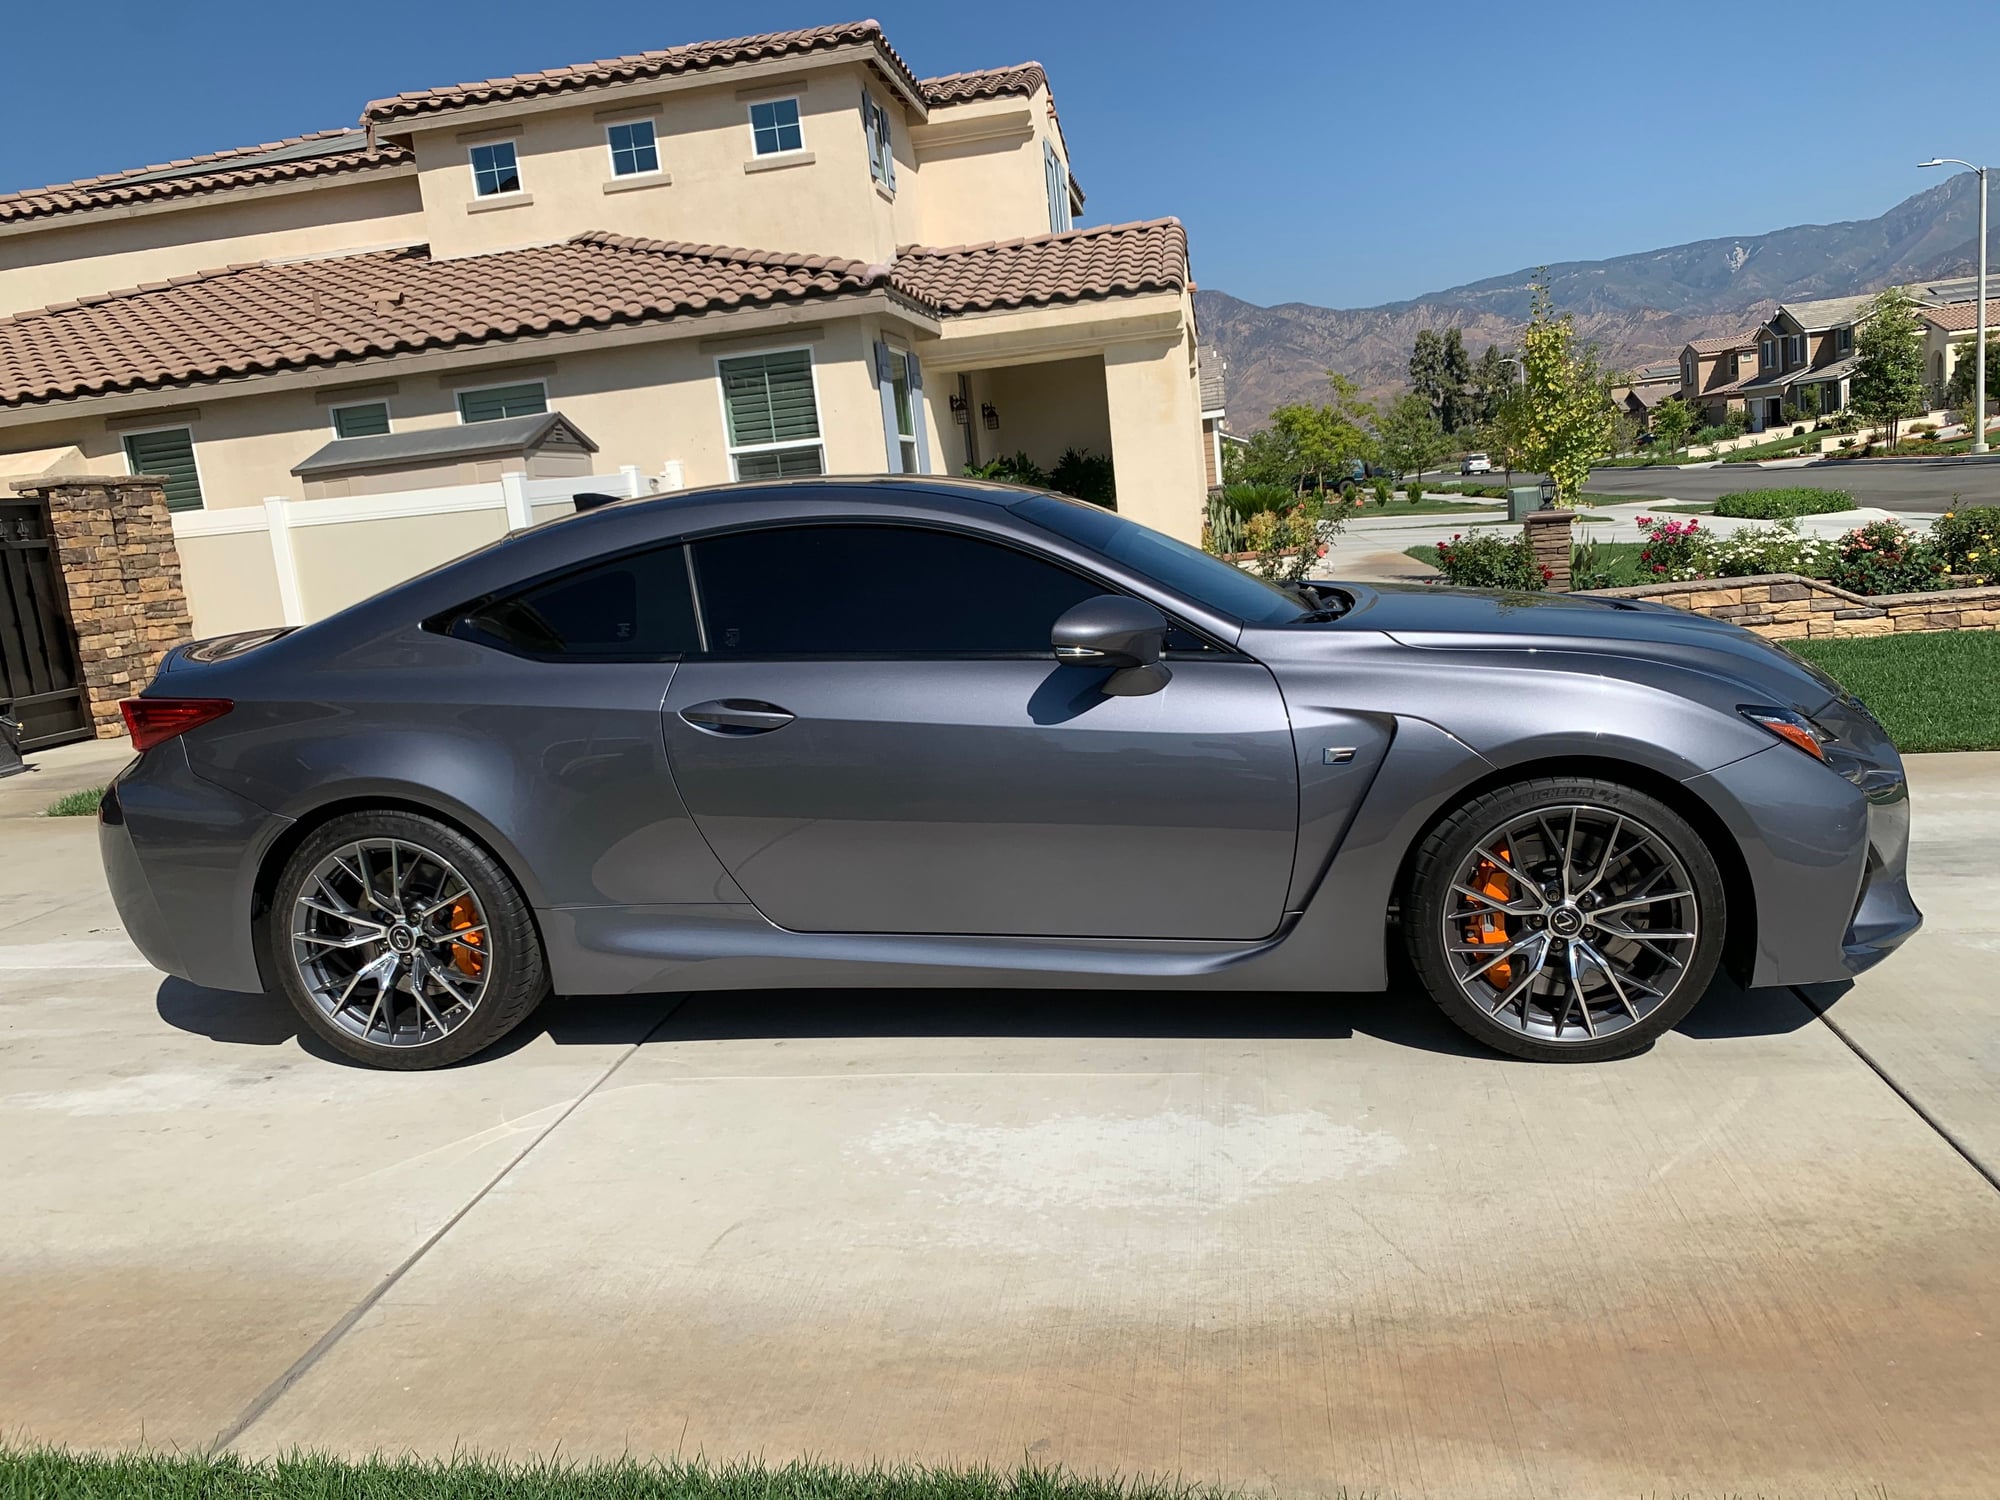 2019 Lexus RC F - 2019 Lexus RCF Single Owner - Used - VIN JTHHP5BC0K5007098 - 985 Miles - 8 cyl - 2WD - Automatic - Coupe - Gray - Redlands, CA 92374, United States